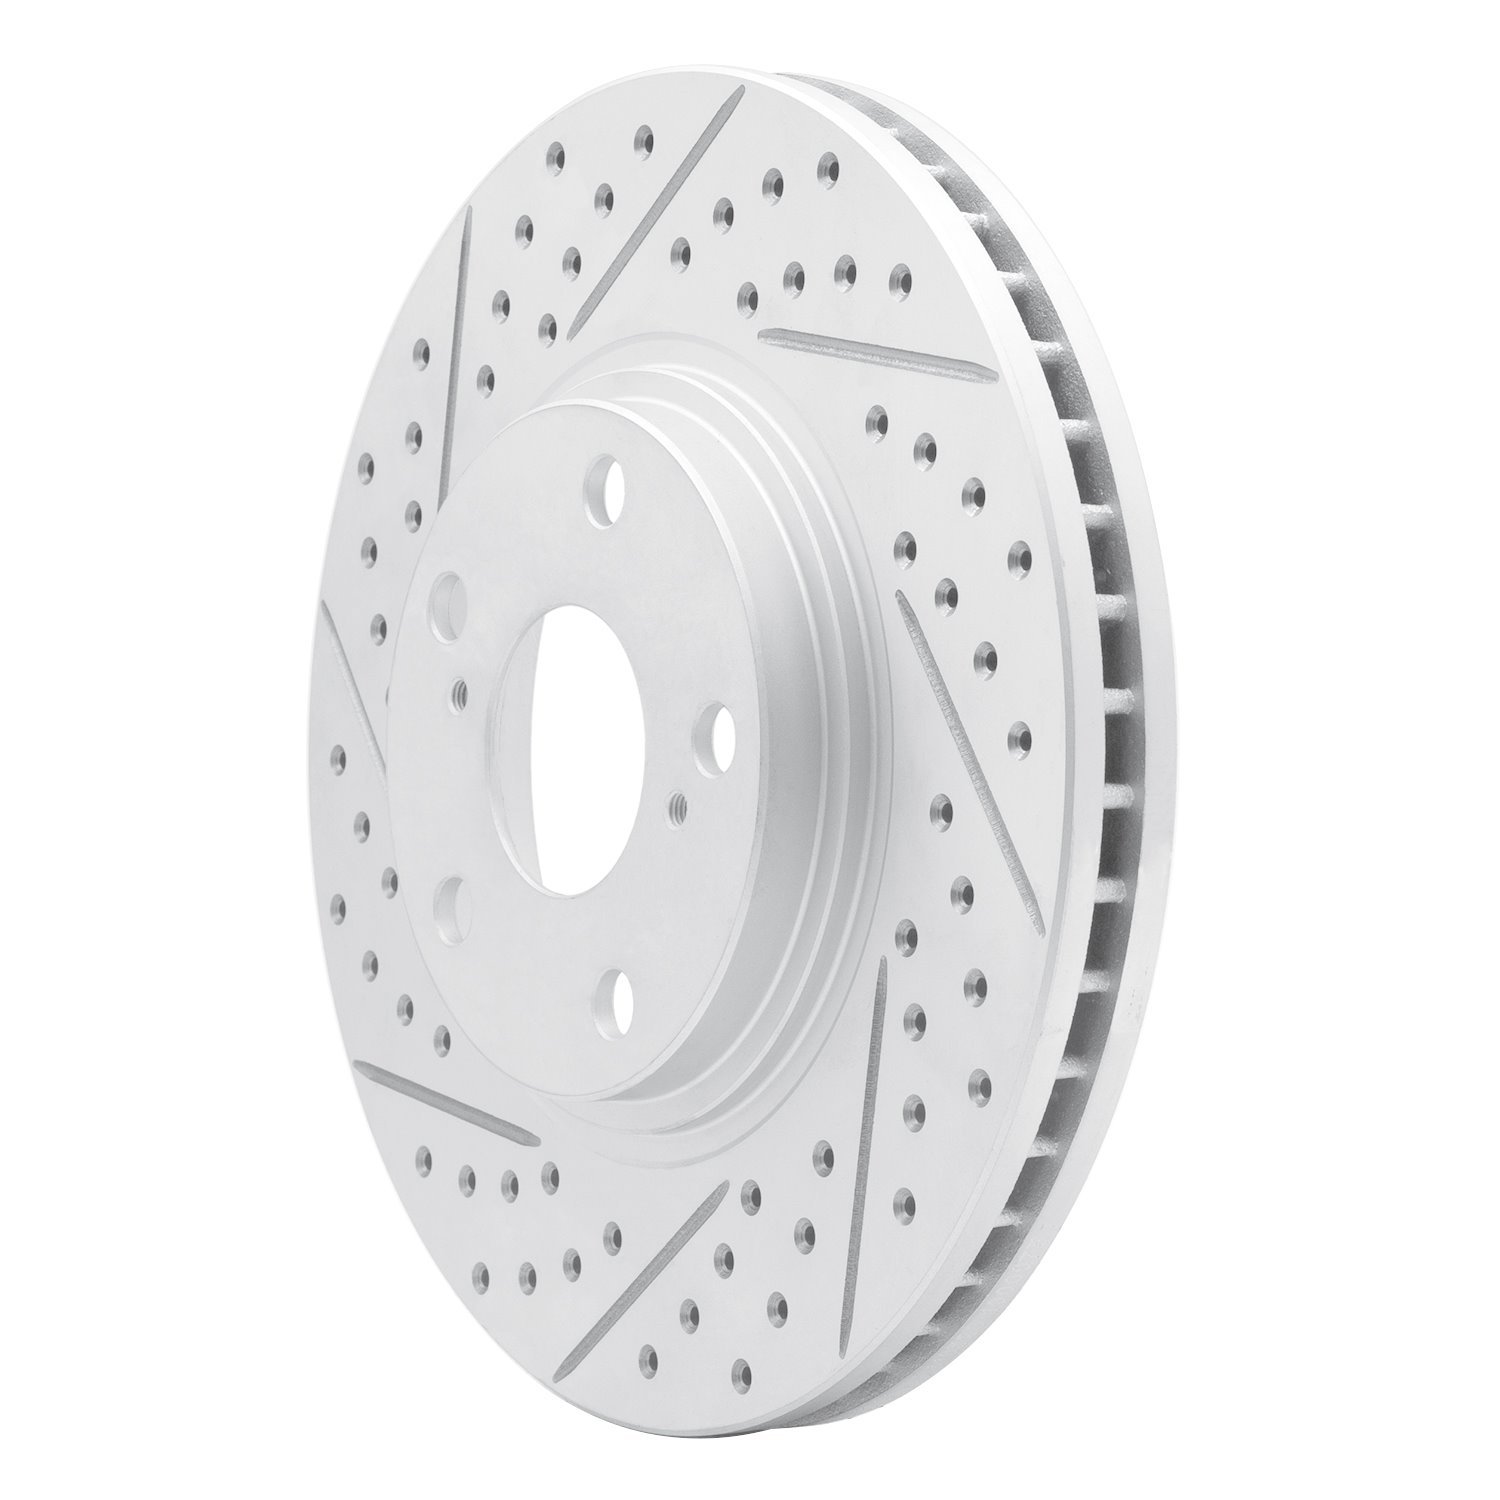 830-76055L Geoperformance Drilled/Slotted Brake Rotor, 1999-2007 Lexus/Toyota/Scion, Position: Front Left